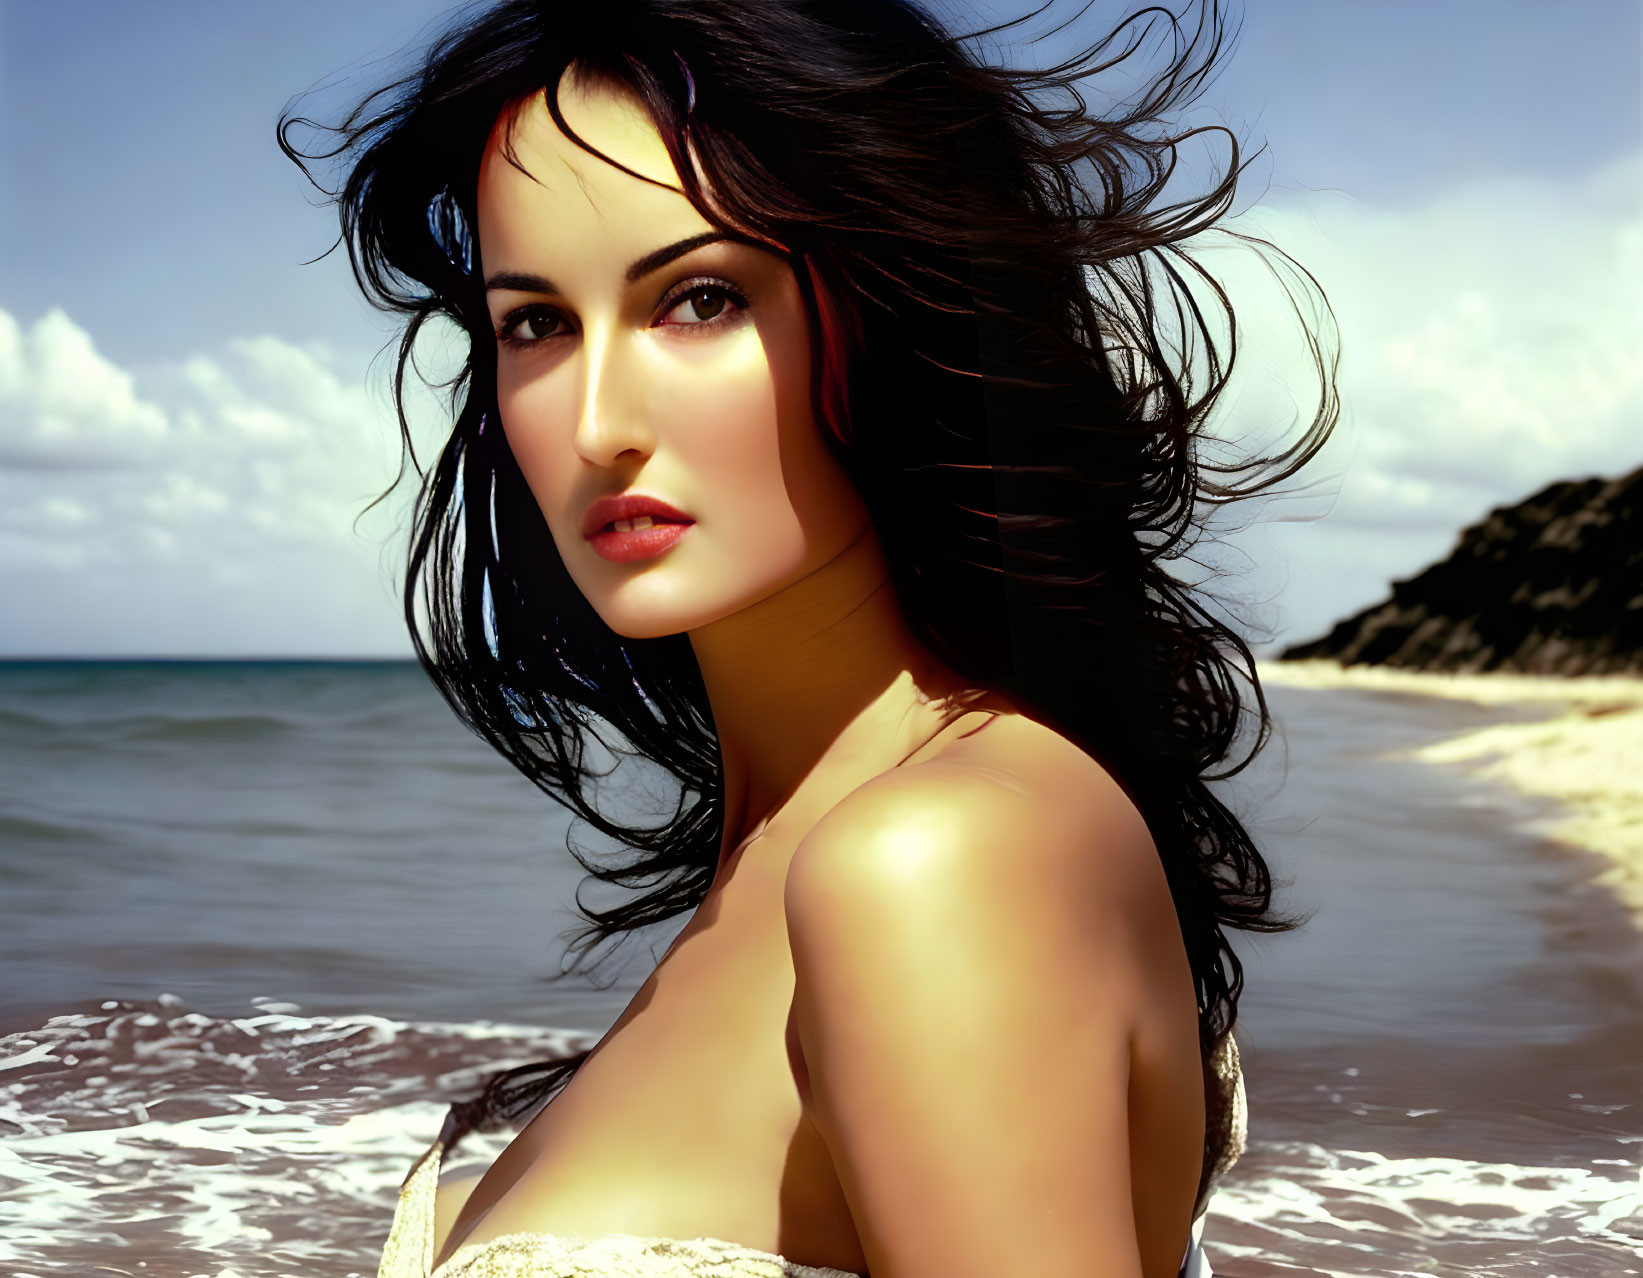 Dark-Haired Woman Poses on Beach with Windswept Hair